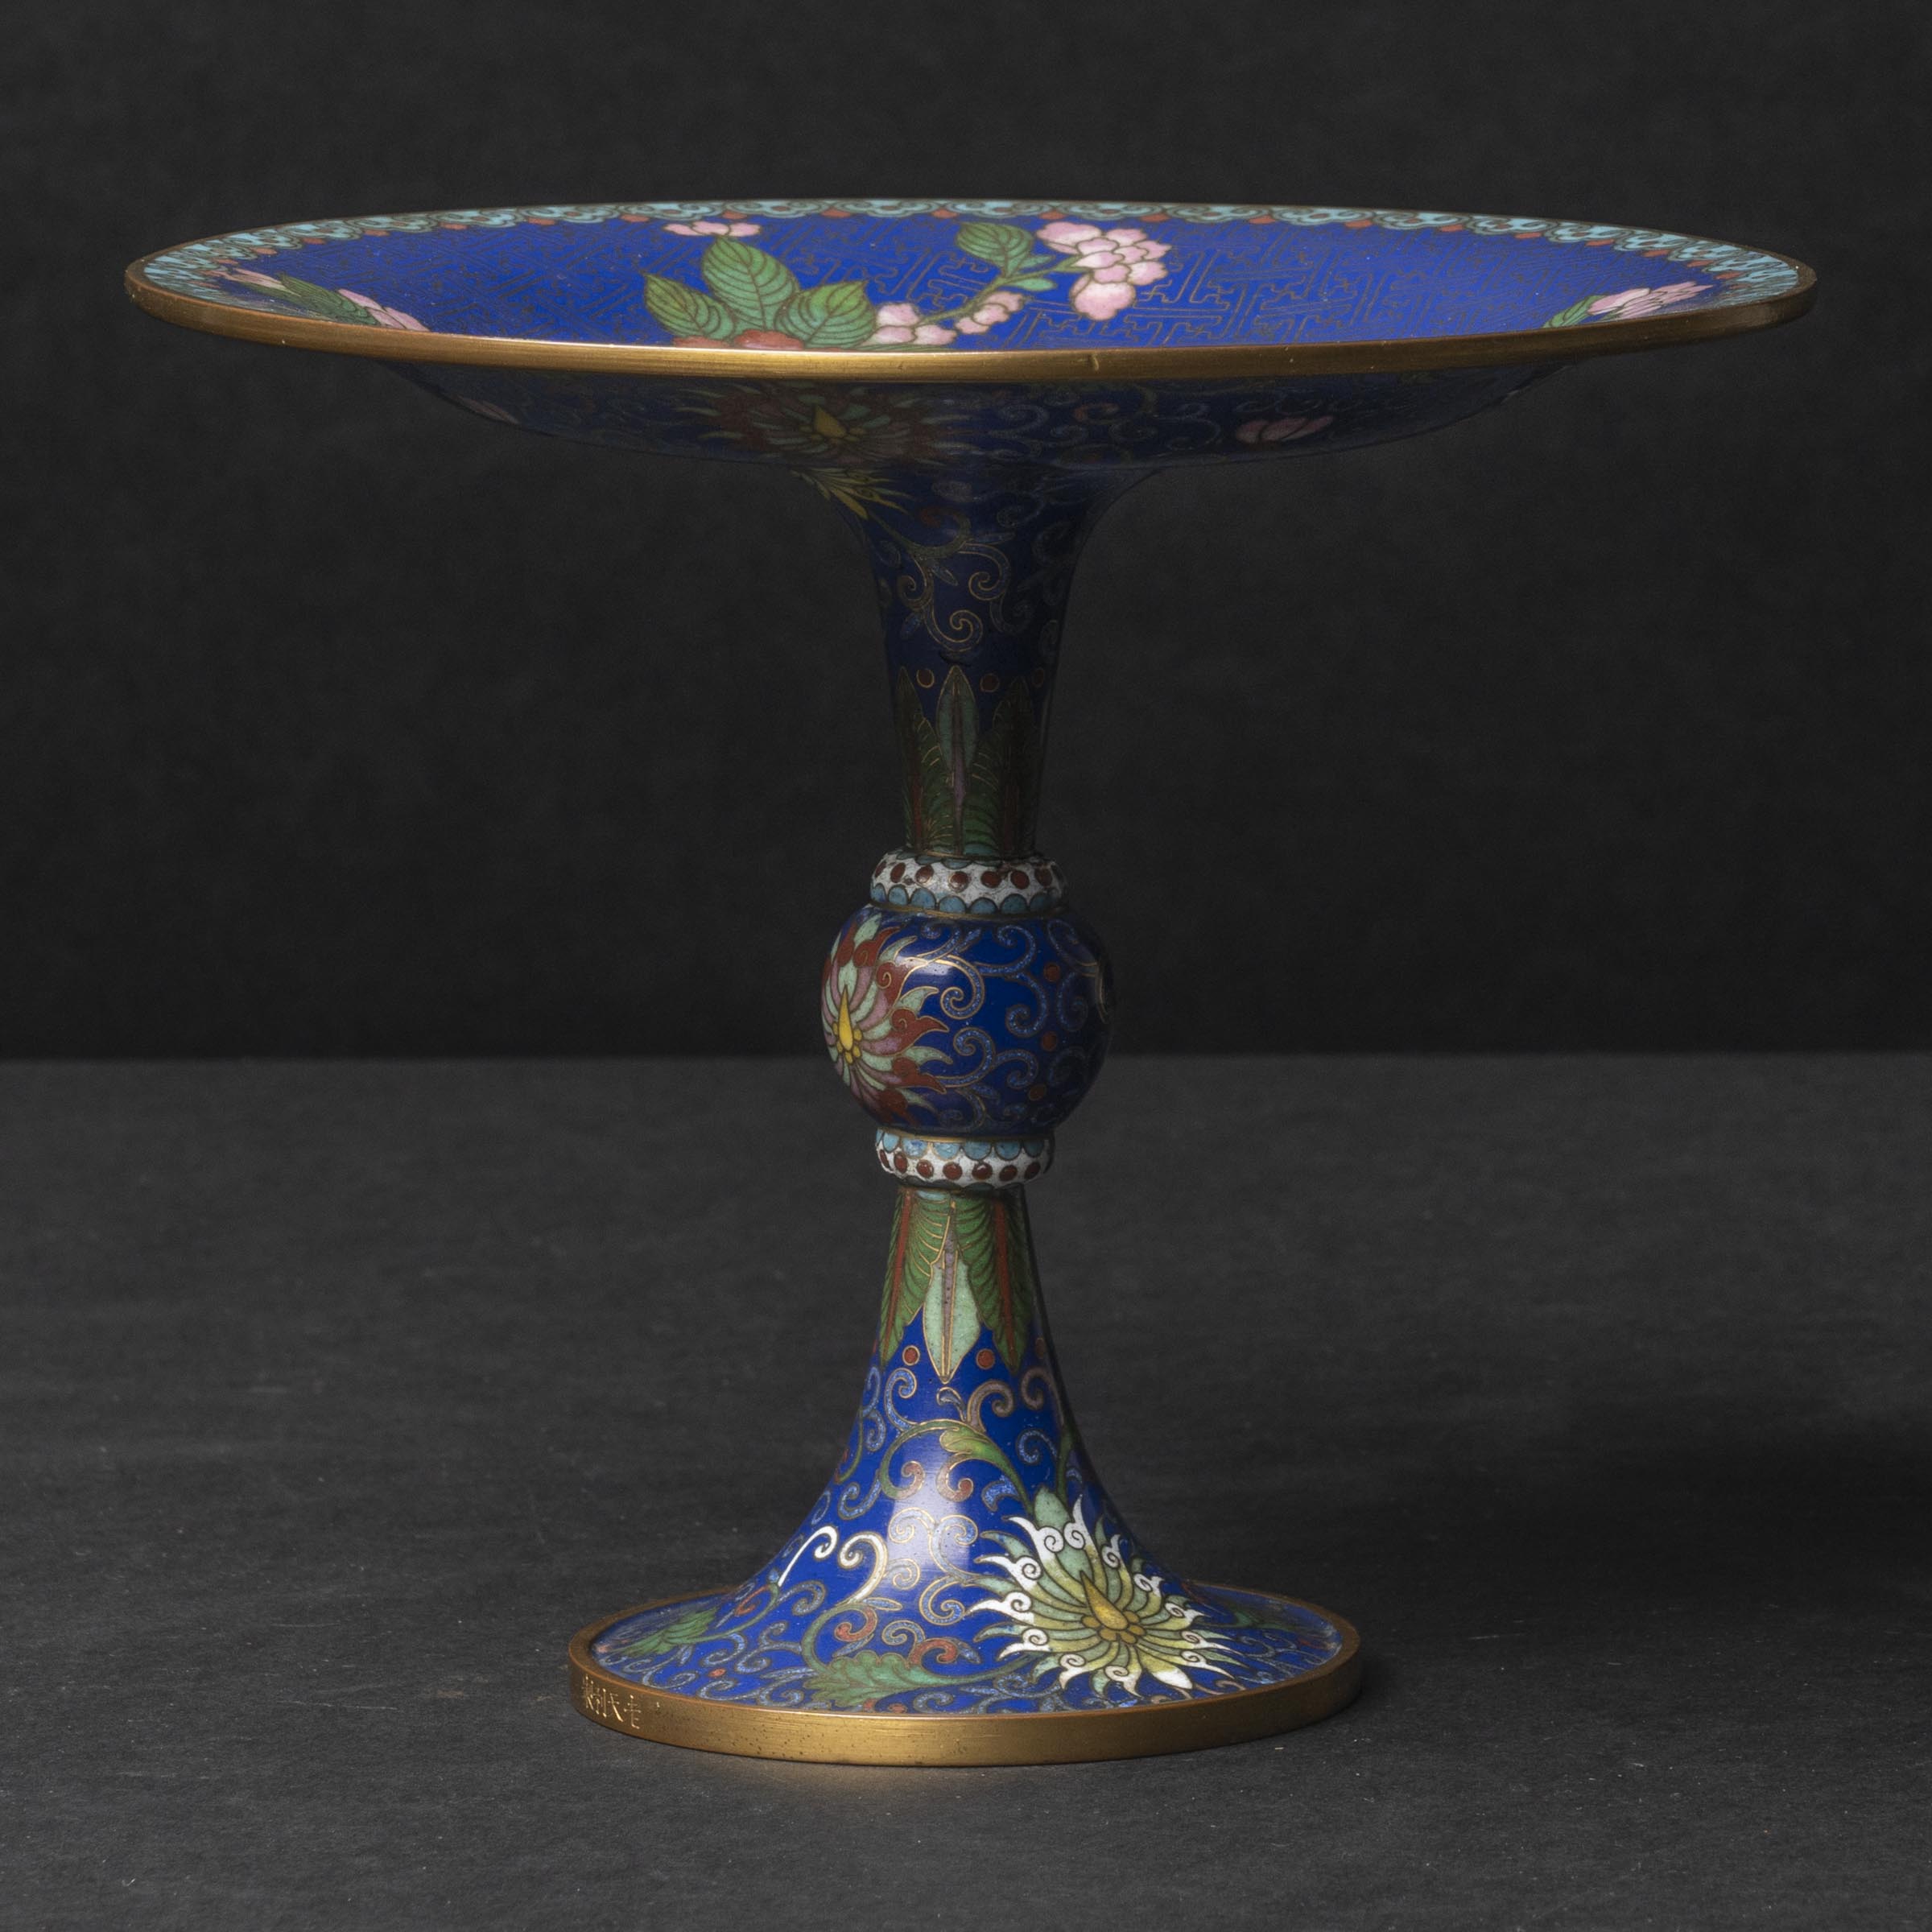 A Cloisonné Enamel 'Peonies' Footed Dish, Lao Tian Li Mark, Early 20th Century